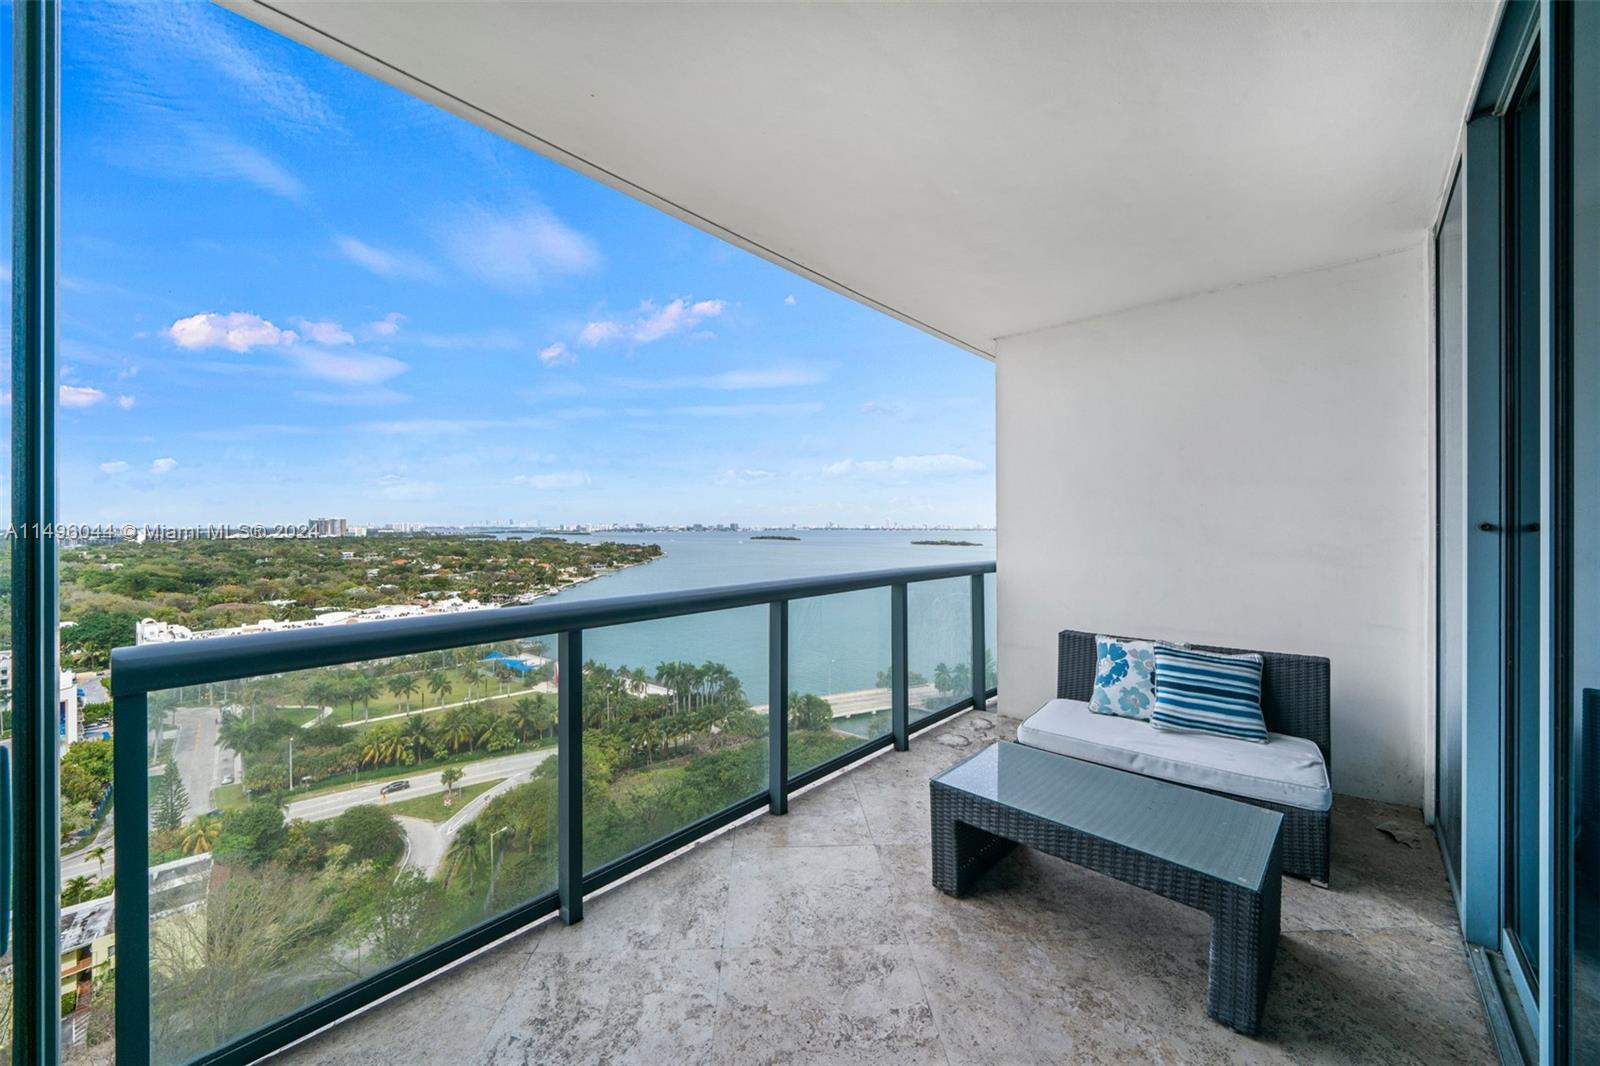 Exceptional modern and elegant 2 Beds / 2.5 Baths with breathtaking views of the Intracoastal. Floor to ceiling windows overlooks Biscayne Bay & the lights of Miami. Upgraded condo including marble floors, sheer weave shades and cherry wood closets. One of the Best lines in the Building. The complex features full service amenities with lap pool, heated pool, BBQ area, fitness center, party room, business center, 24 hours security, pets welcome. Minutes drive to South Beach, Miami Beach, and Downtown. Walking distance to Wynwood, Design District and Midtown shopping & dining. Quick access to all major highways. Blue was named "The Best New Condo in Miami".